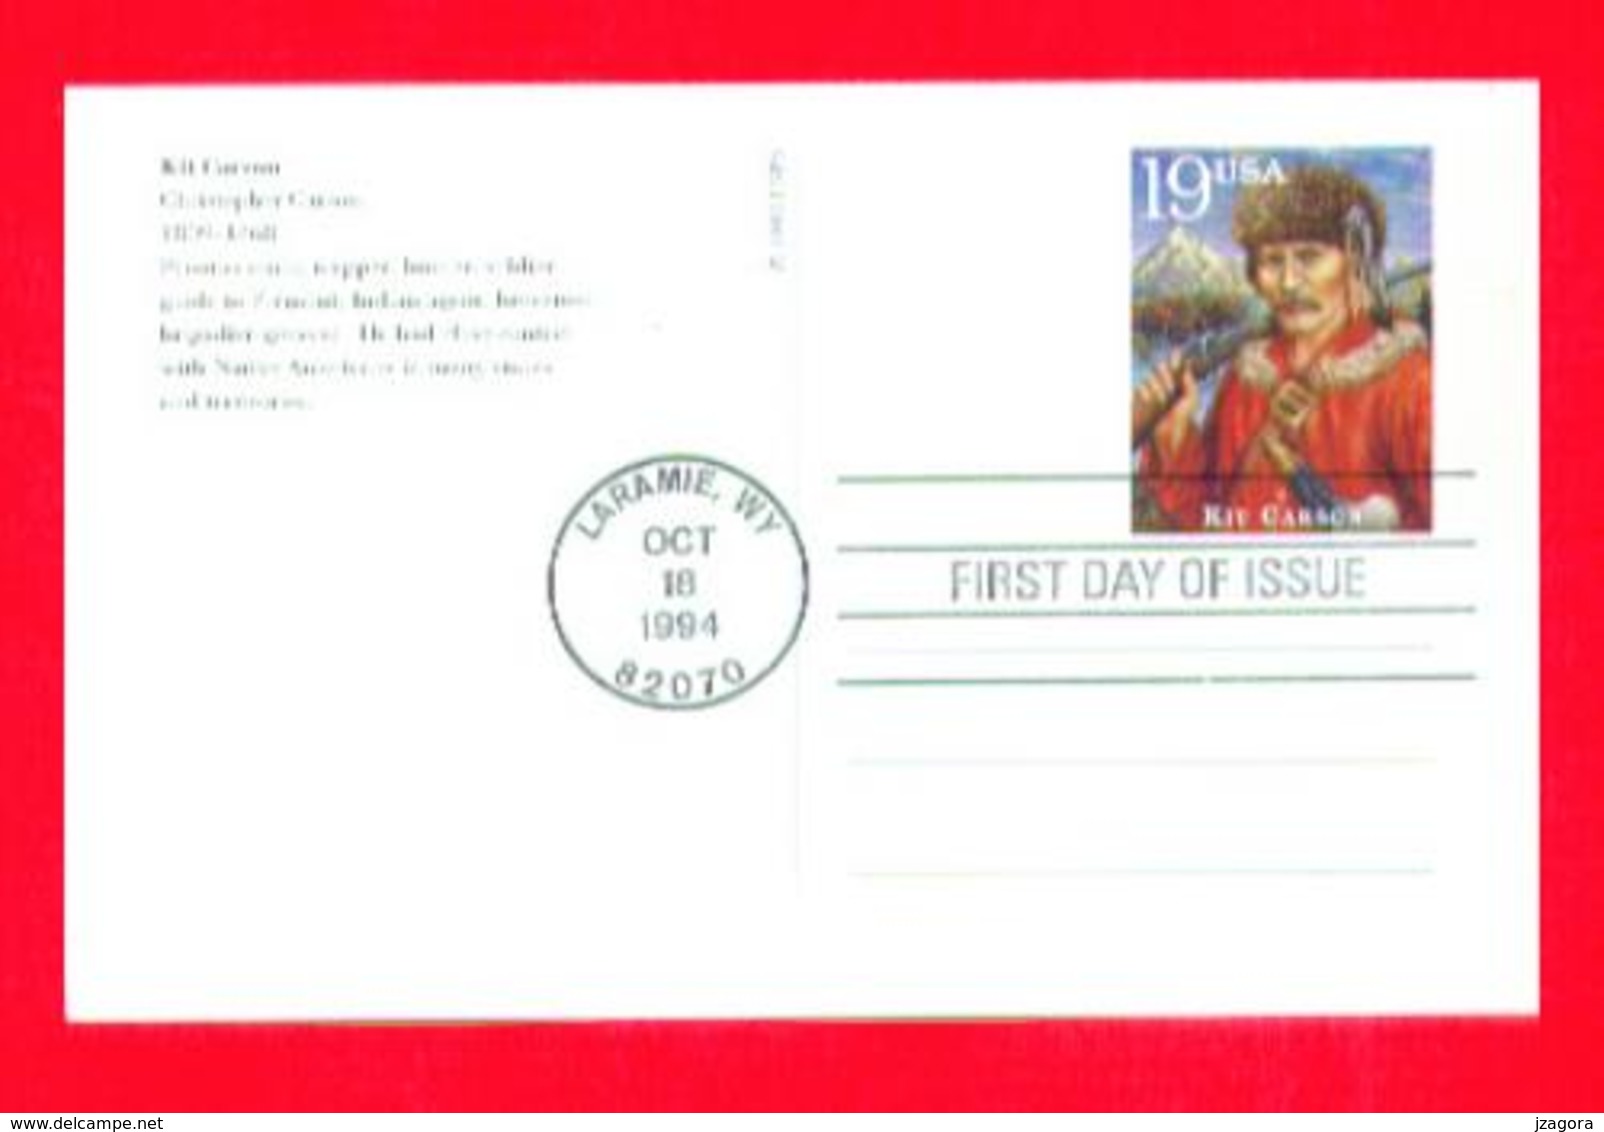 LEGENDS OF WILD WEST - KIT CARSON USA 1994 FDC UX 191 PRE-PAID POST CARD Law  Prepaid - American Indians